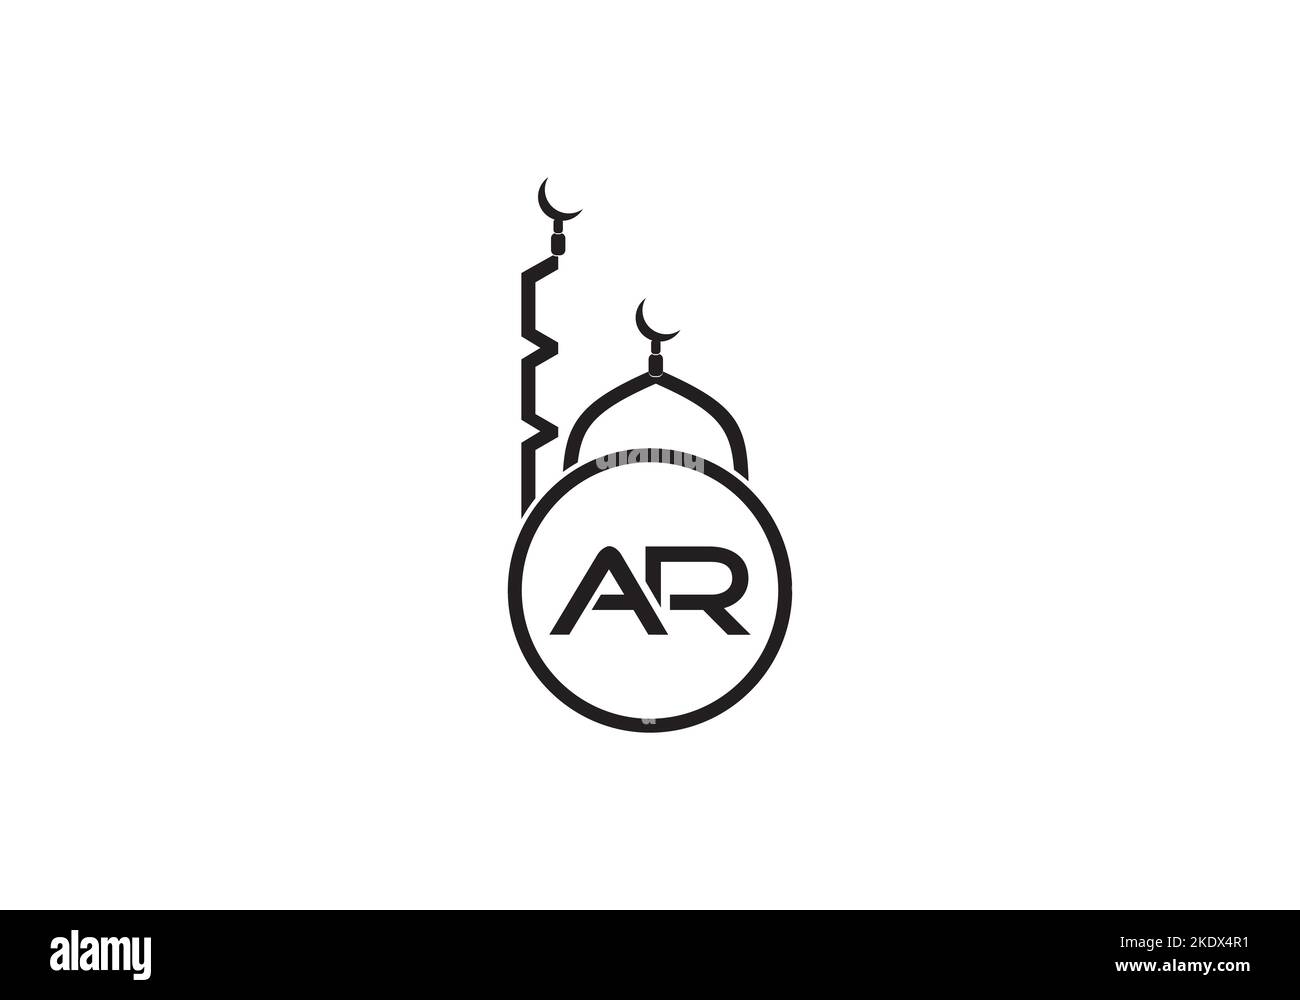 Islamic mosque logo and minar logo and symbol design vector with the letter and alphabets Stock Vector